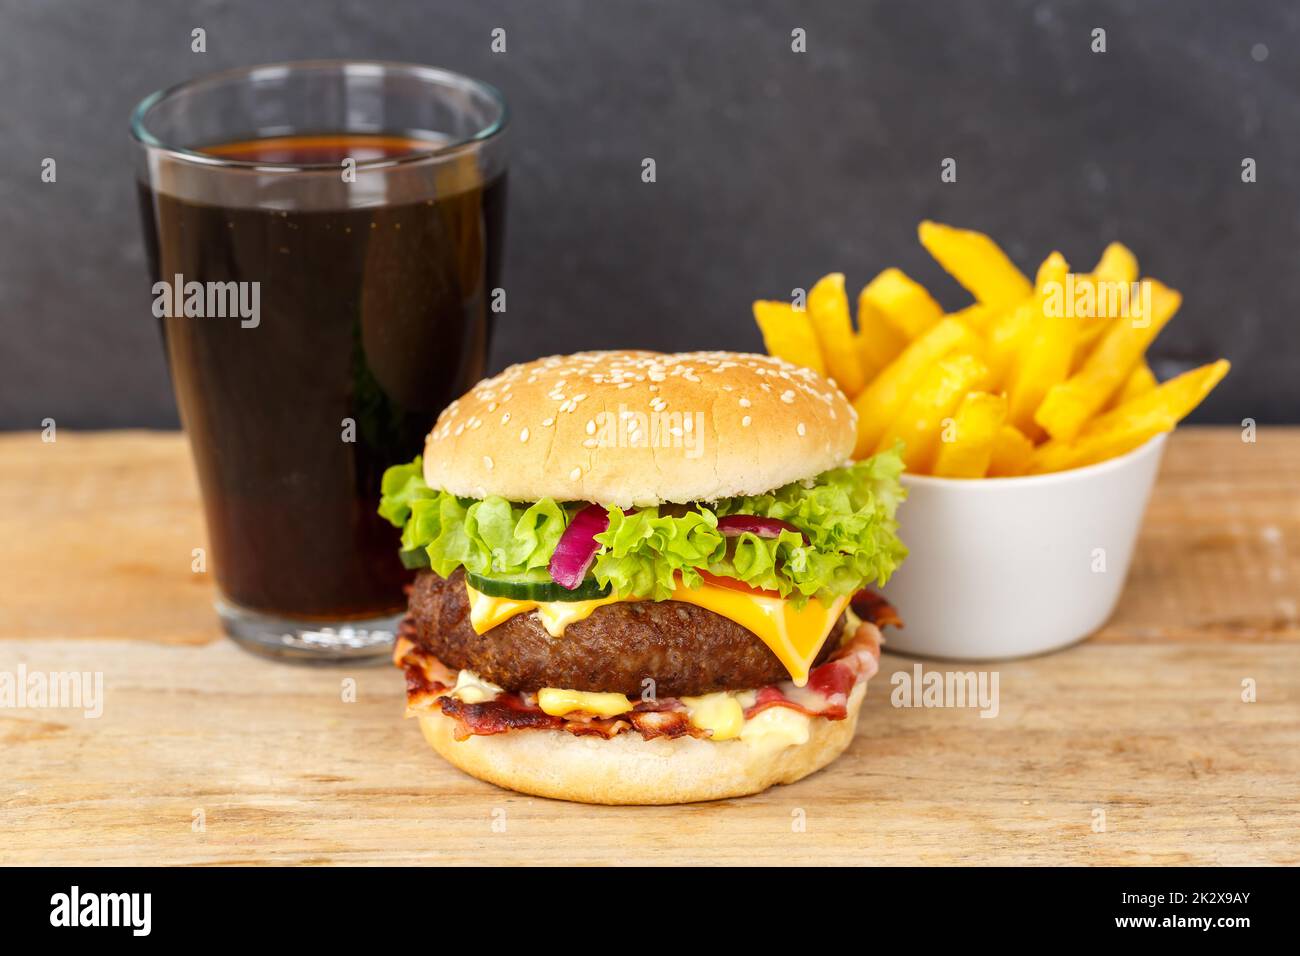 Hamburger Cheeseburger meal fastfood fast food with cola drink and French Fries on a wooden board Stock Photo